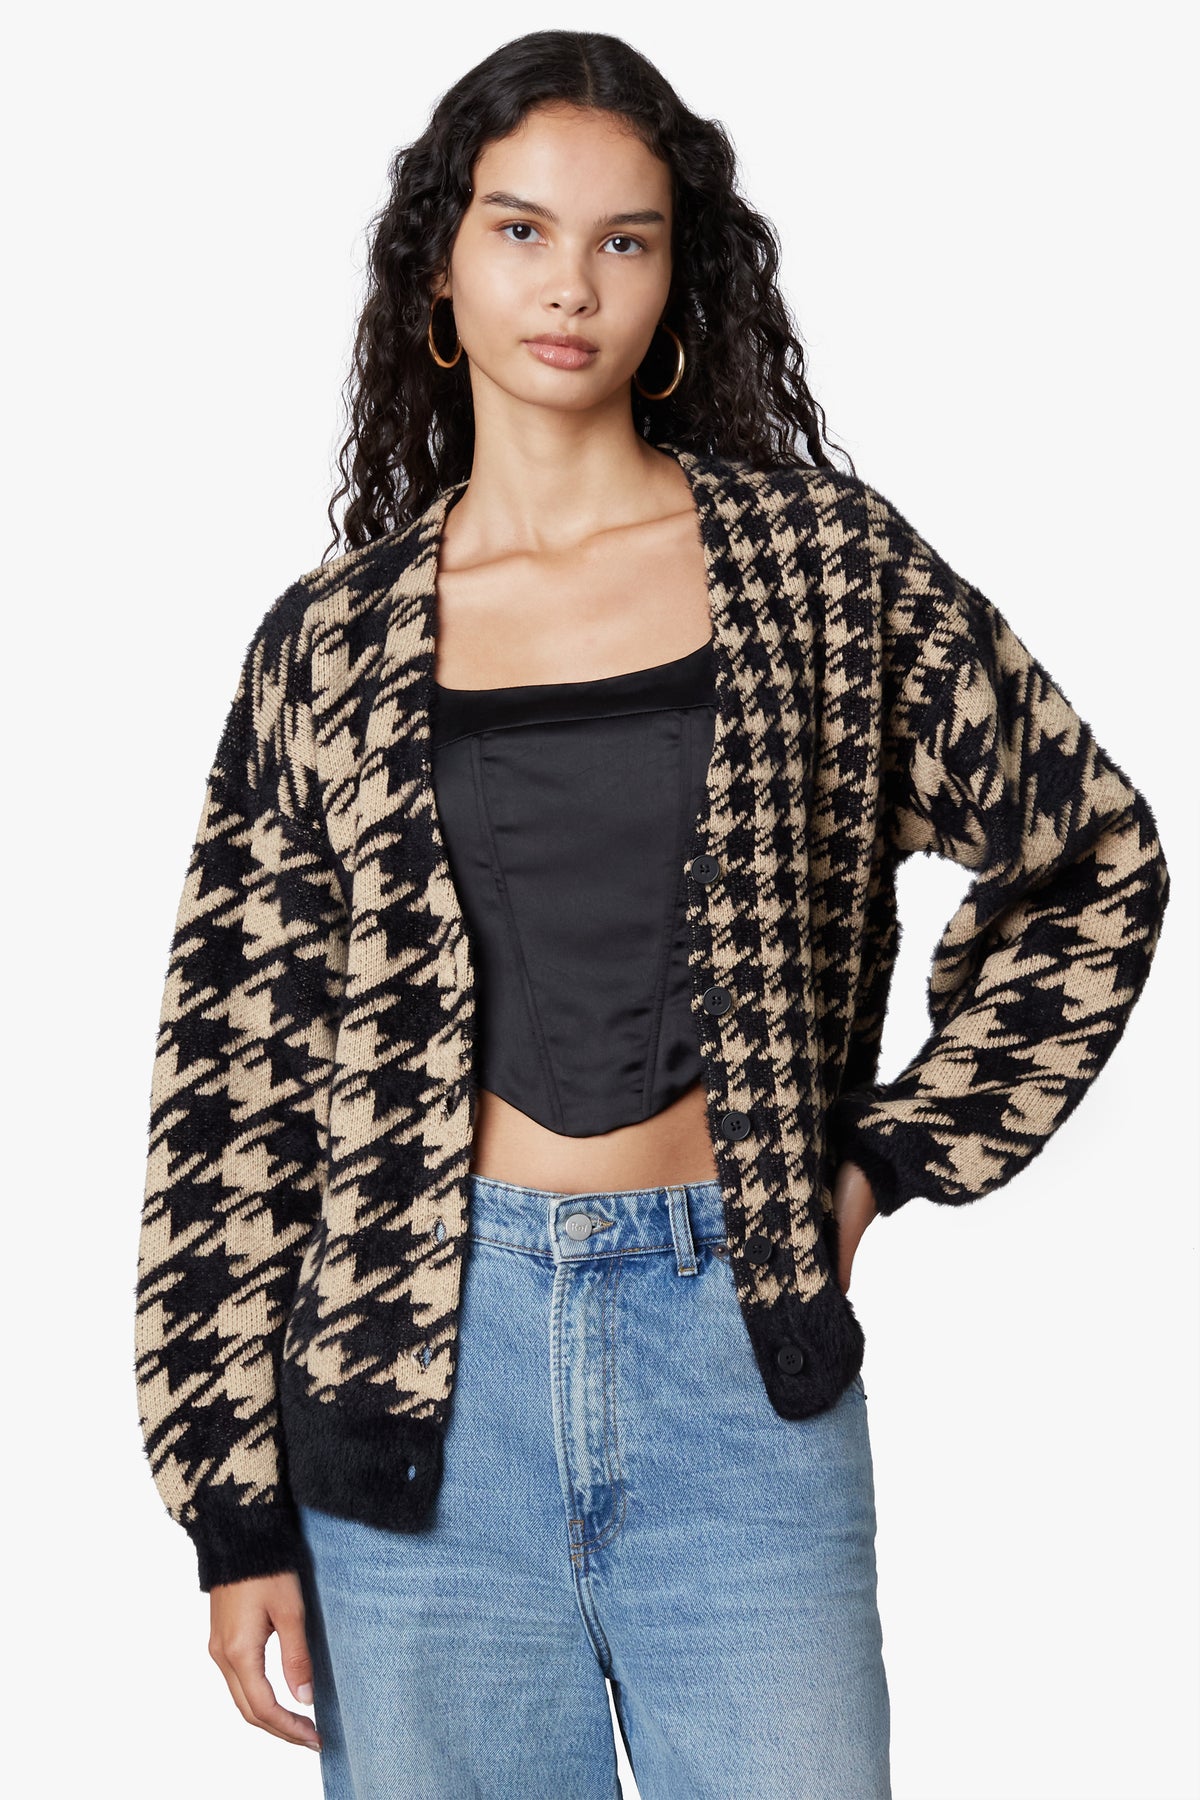 HOUNDSTOOTH SWEATER CARDIGAN  UNFETTERED PATTERNS – Anita by Design